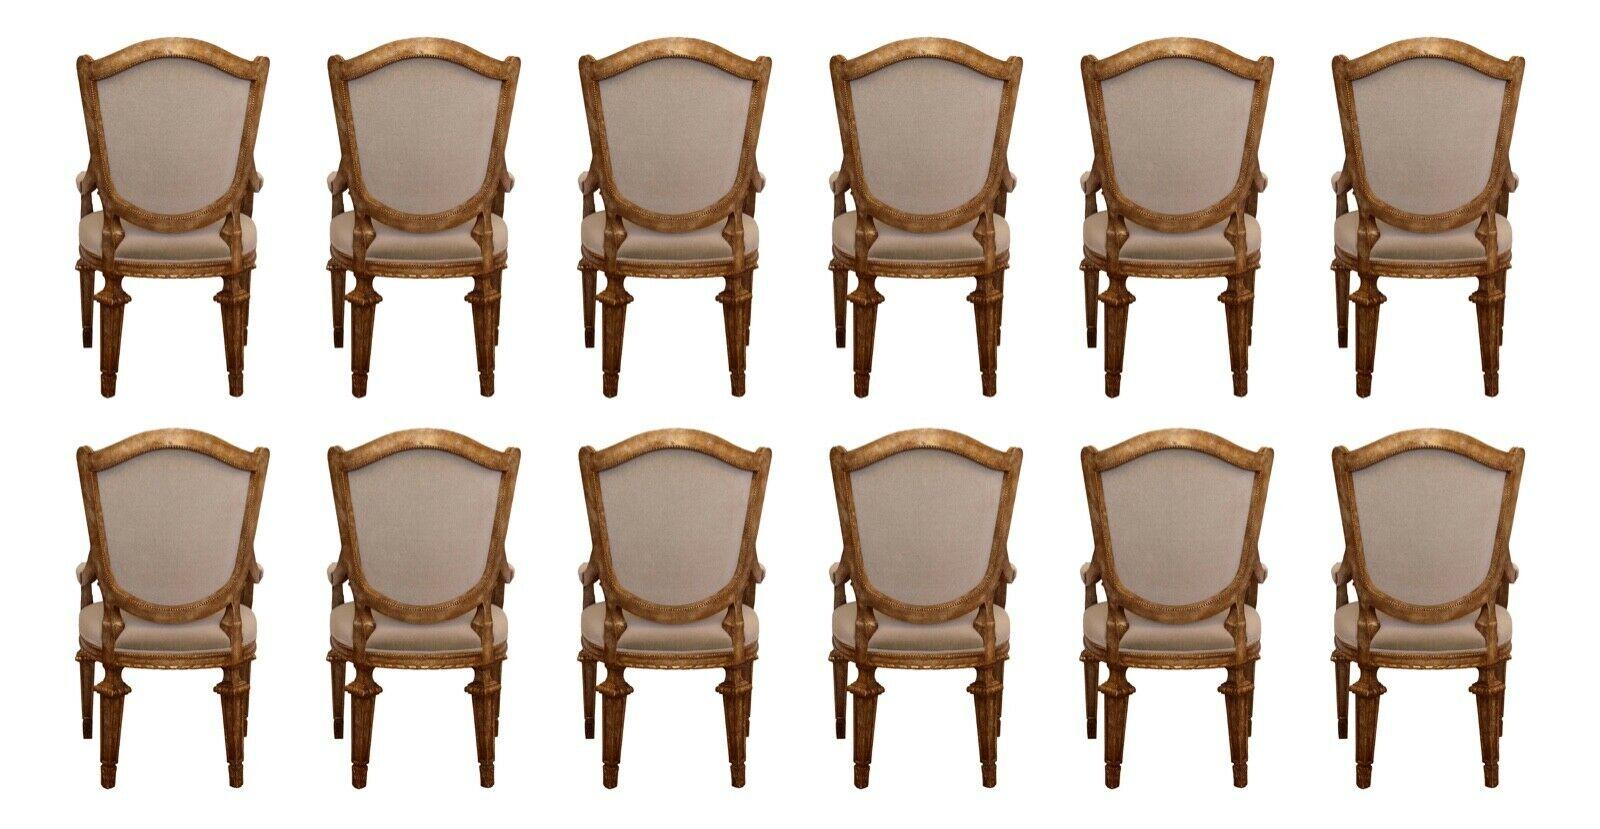 This lovely set of 12 armchairs by Baker are detailed in an antique gold frame and neutral grey upholstered seats and backs. In very good condition.

Dimensions: 24.5 W X 28 D X 42 H; seat height: 20.5